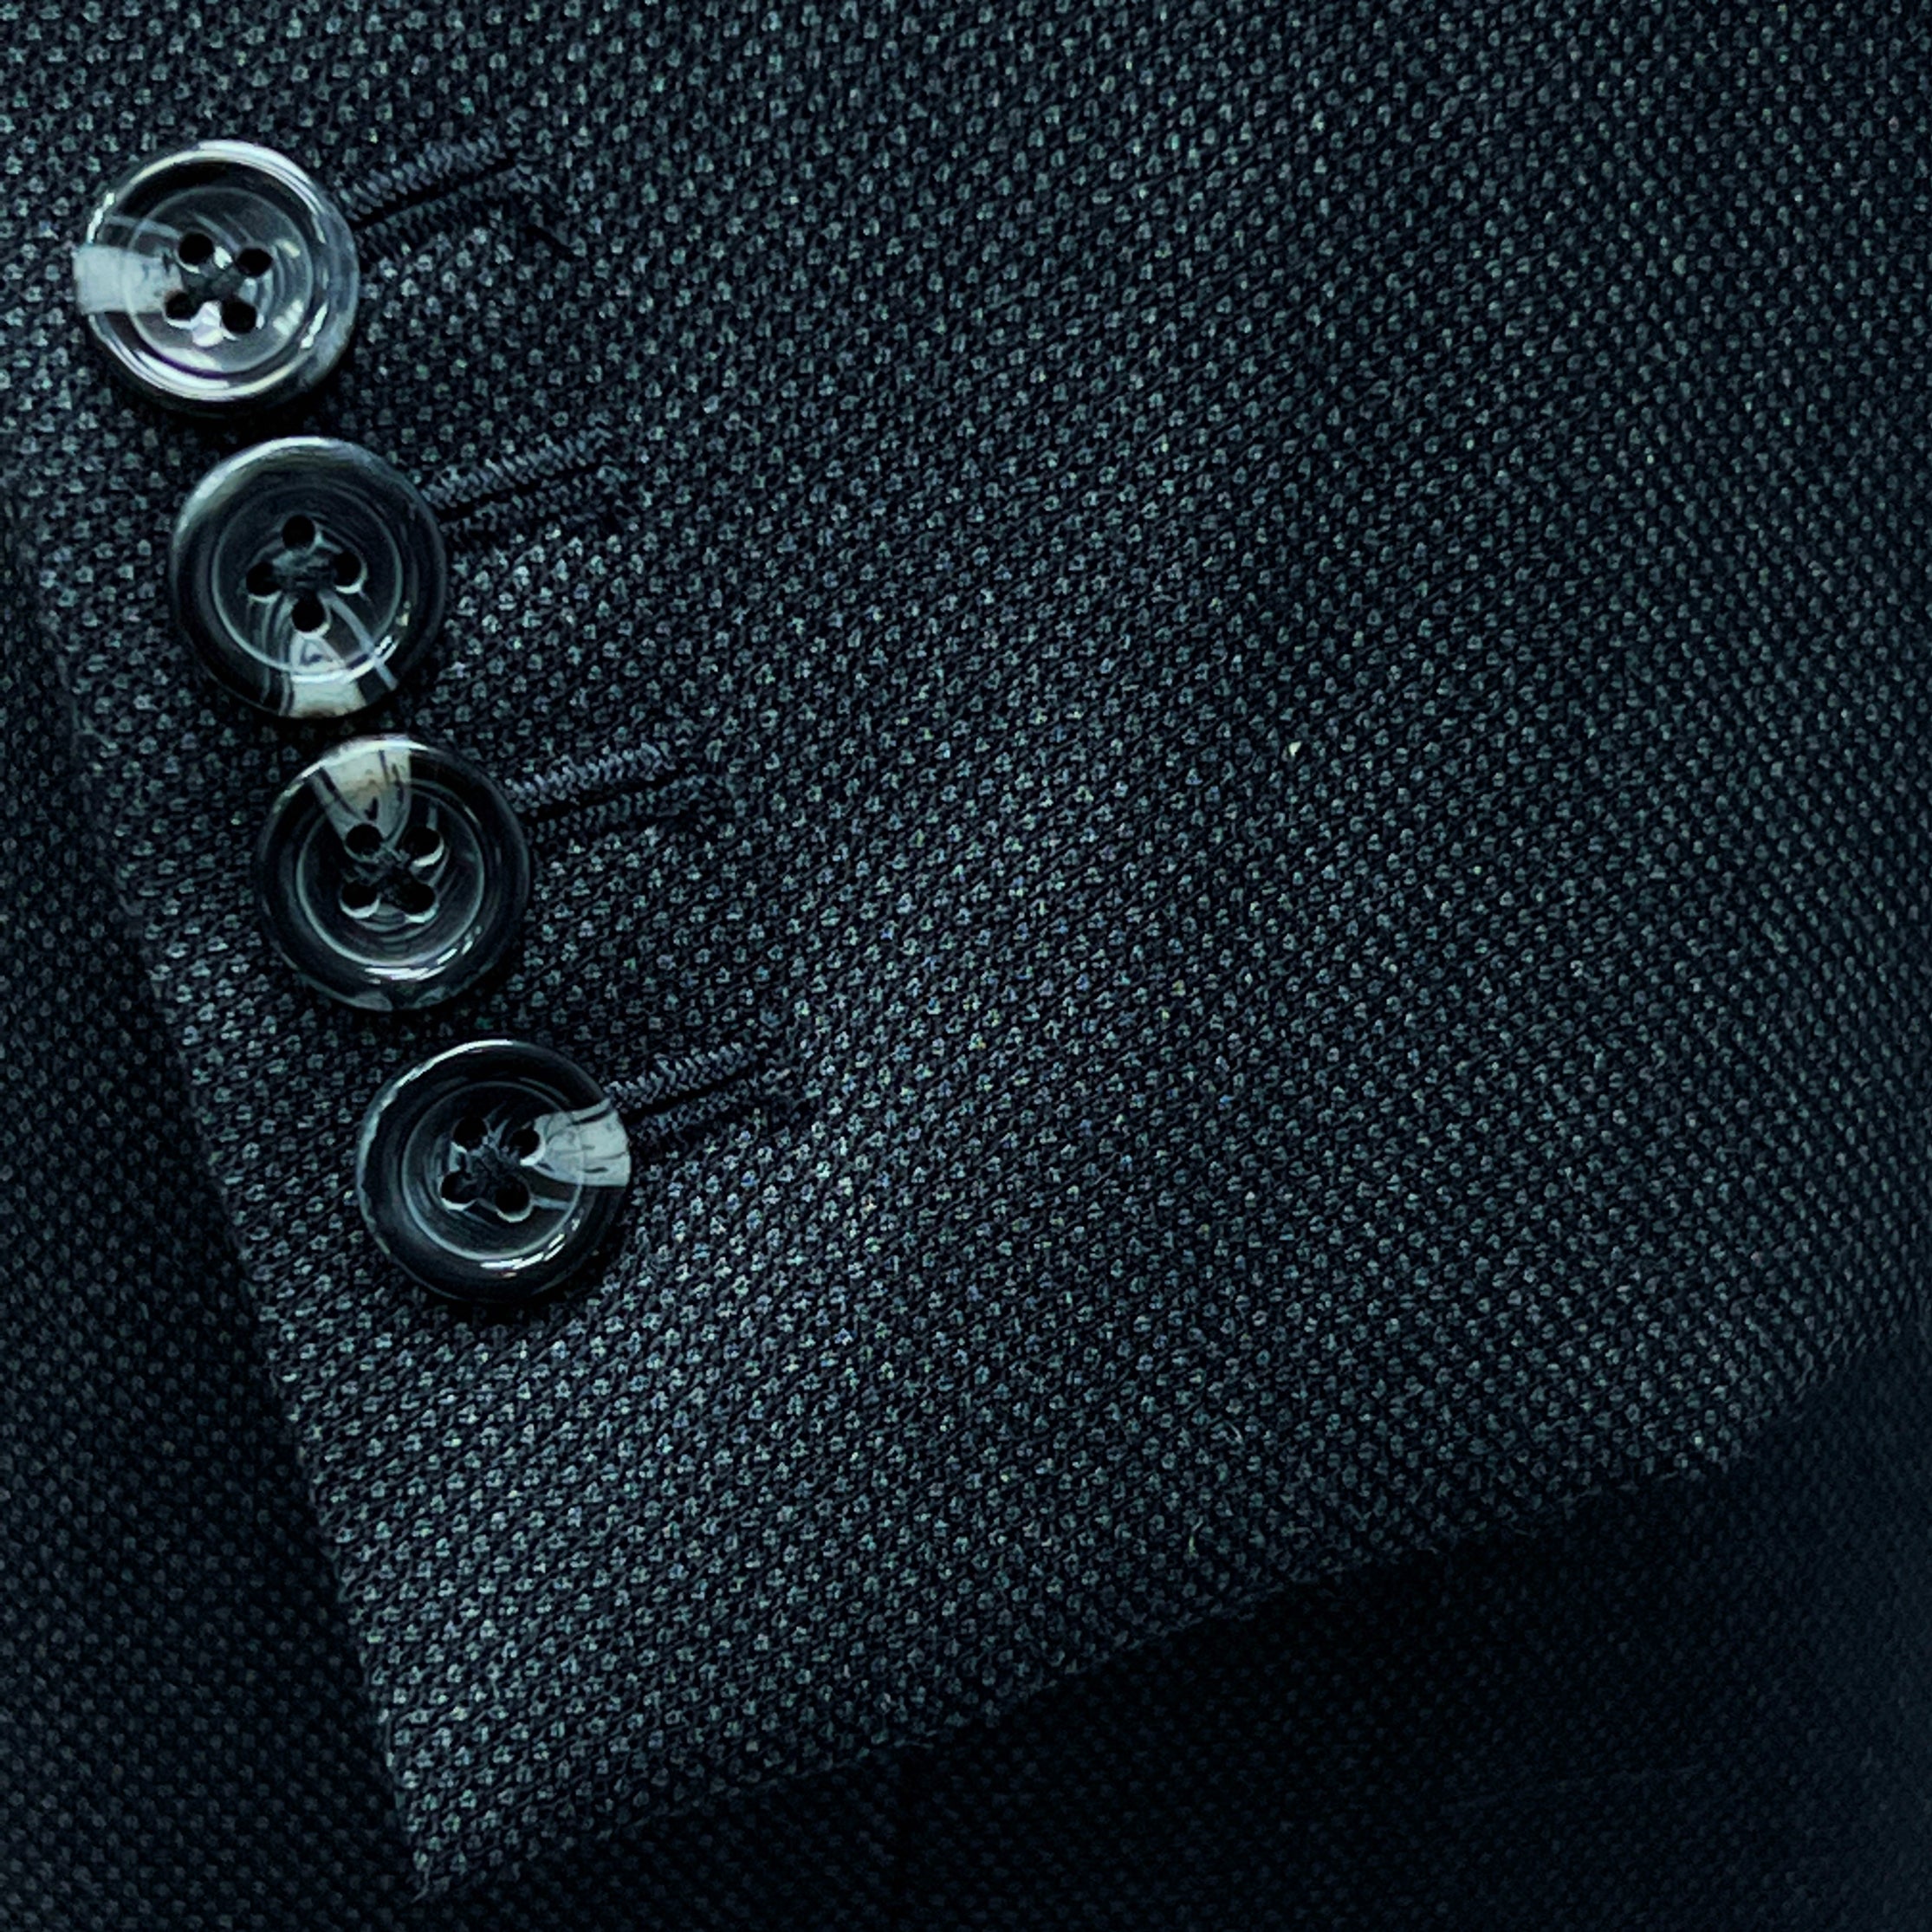 Dark grey birdseye custom suit, close-up of the sleeve cuffs and buttons for work attire